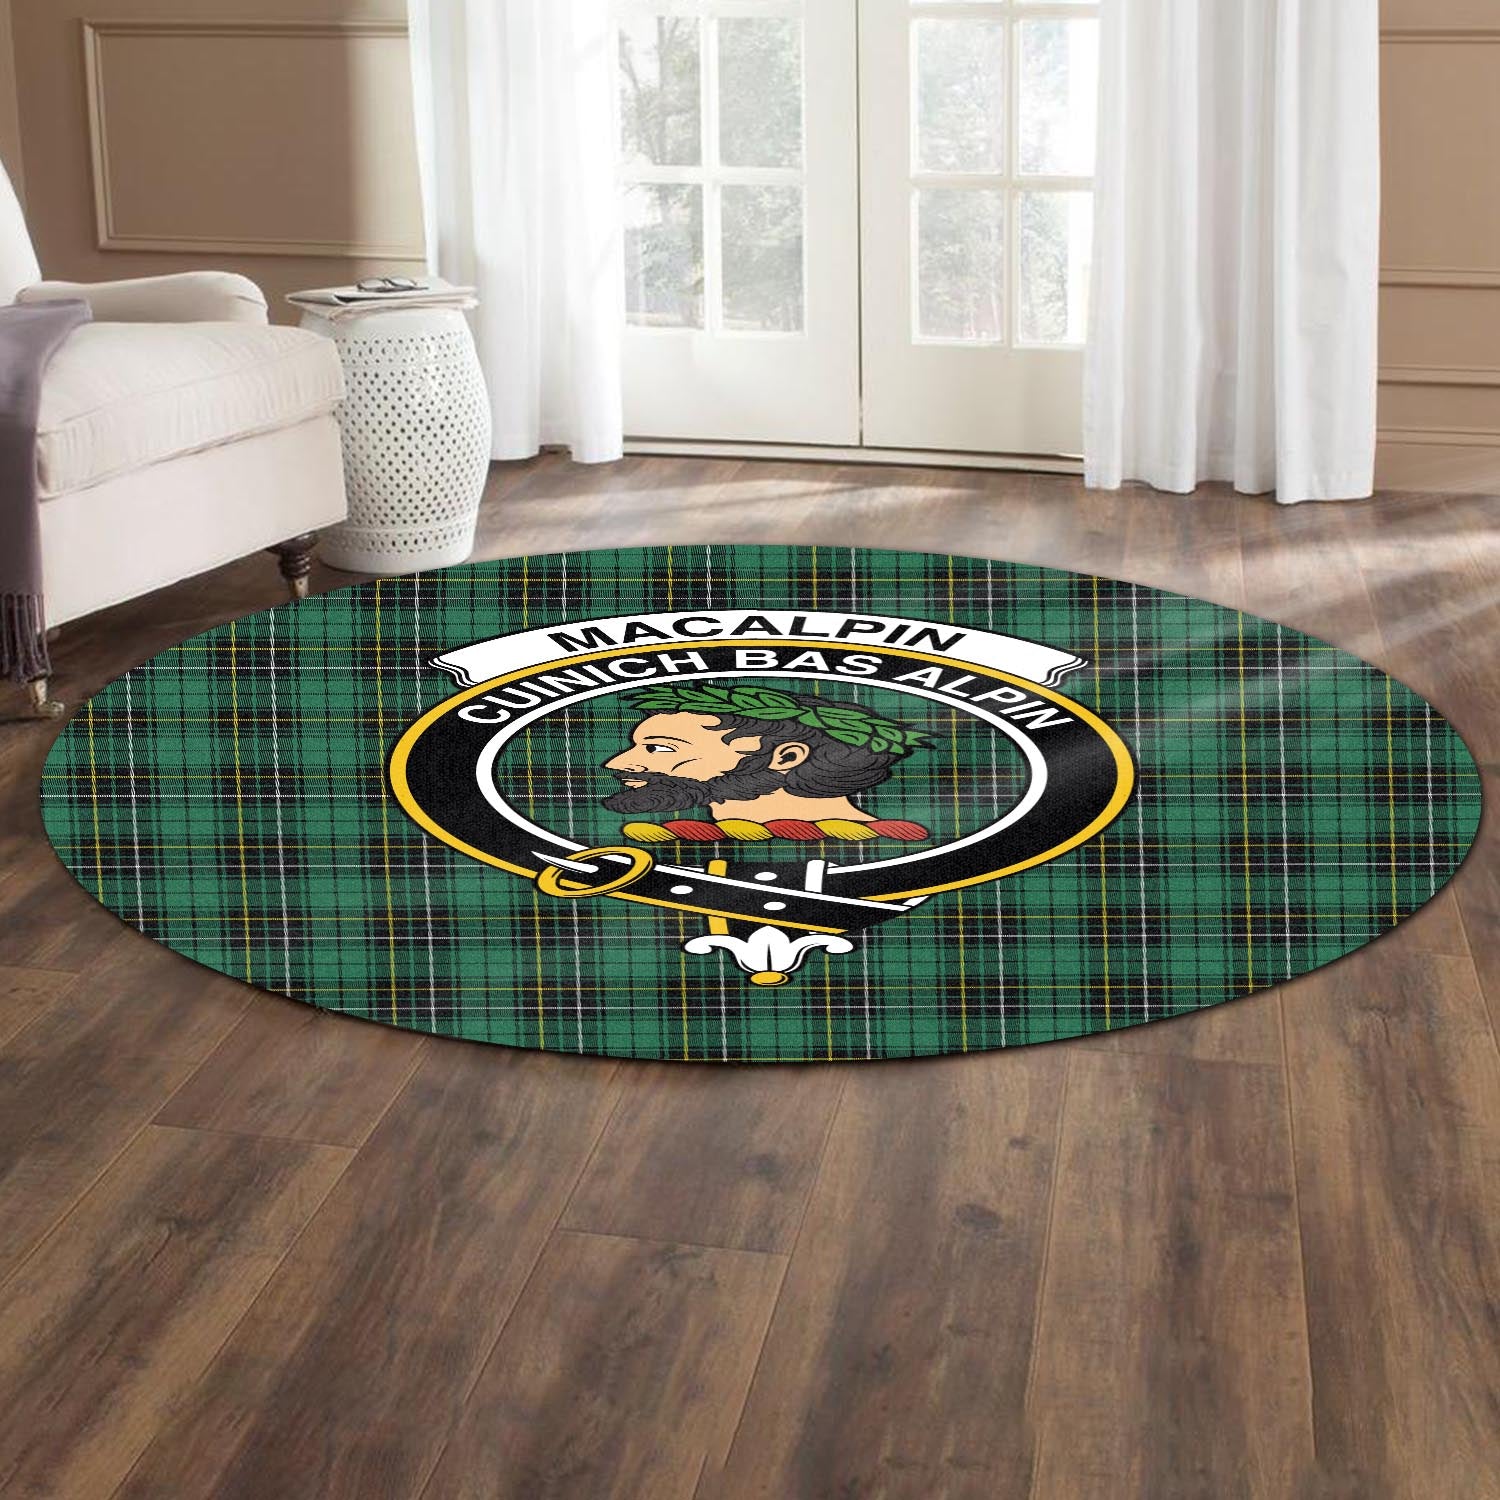 macalpin-ancient-tartan-round-rug-with-family-crest